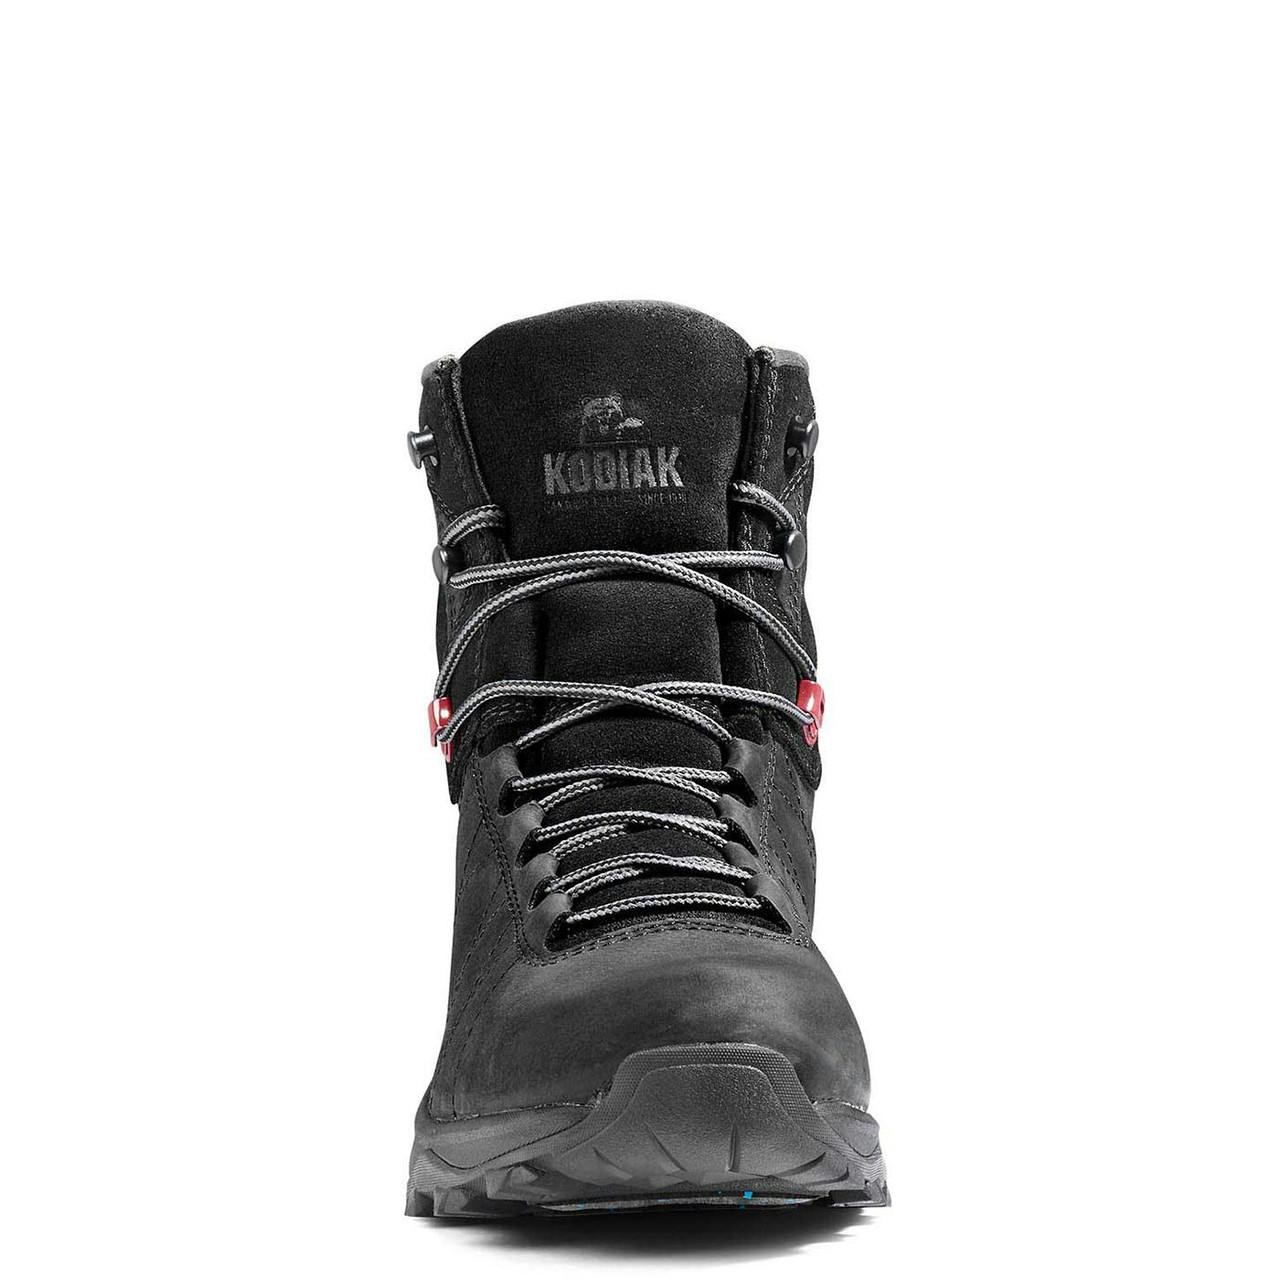 Taggish Waterproof Insulated Boots Black